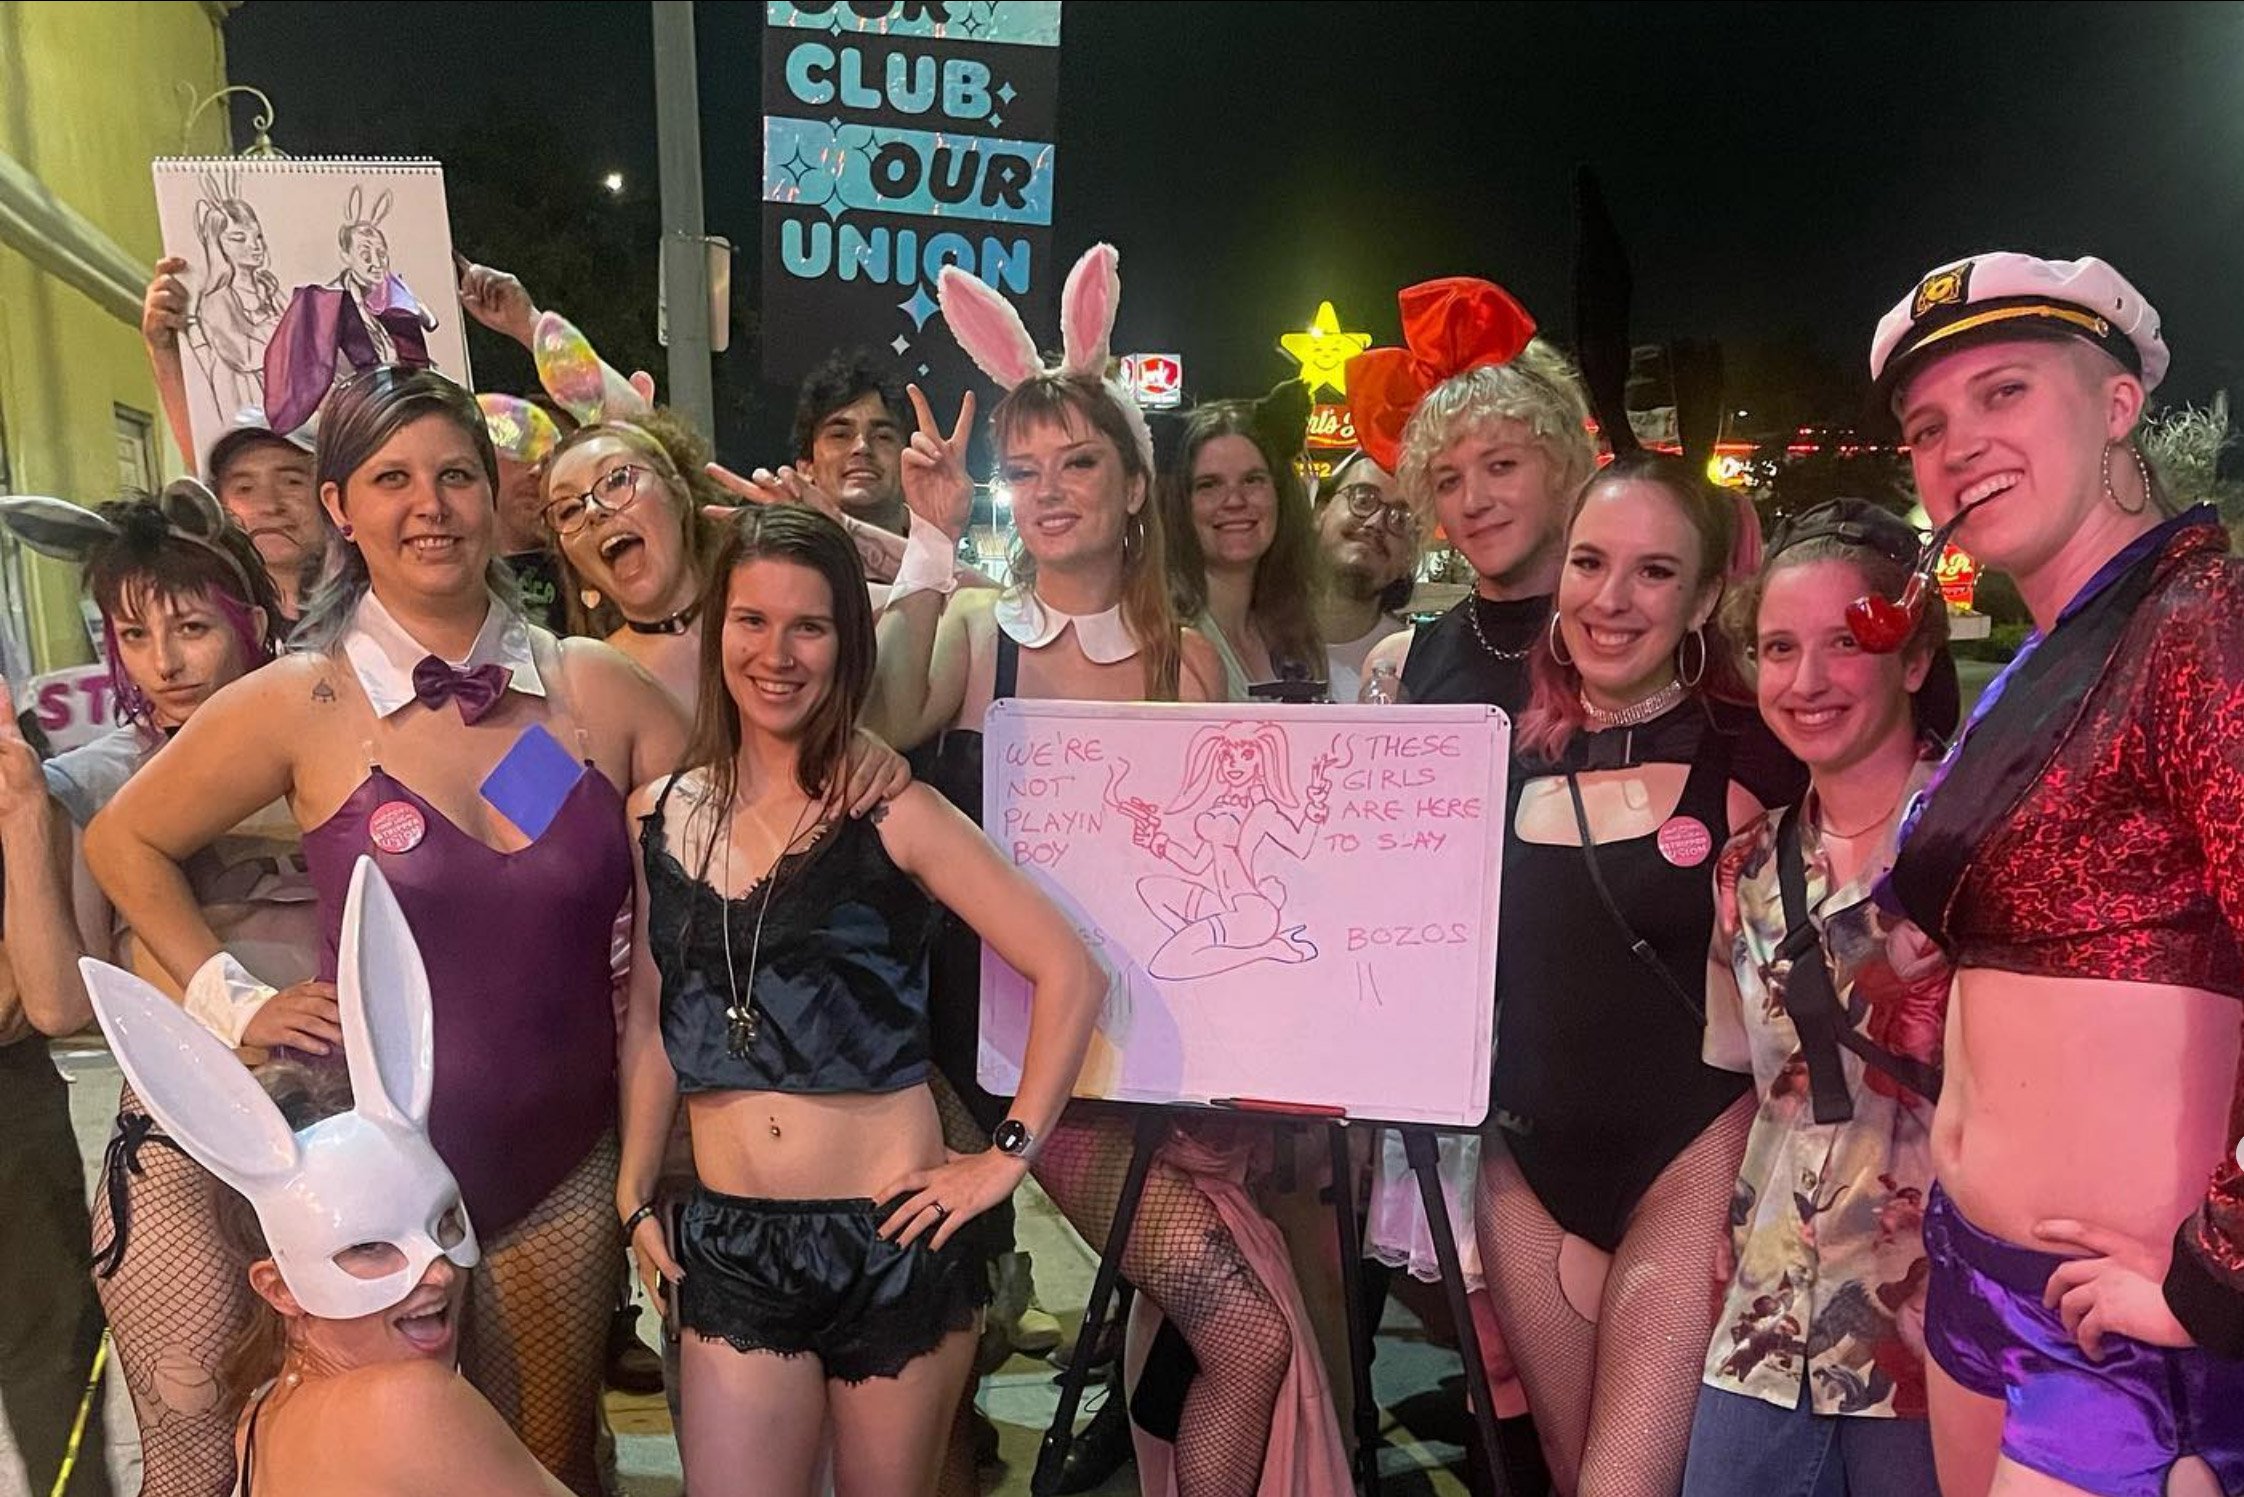 Strip Club Dancers Plan to Hold Union Elections as Unionization Wave Spreads Truthout pic